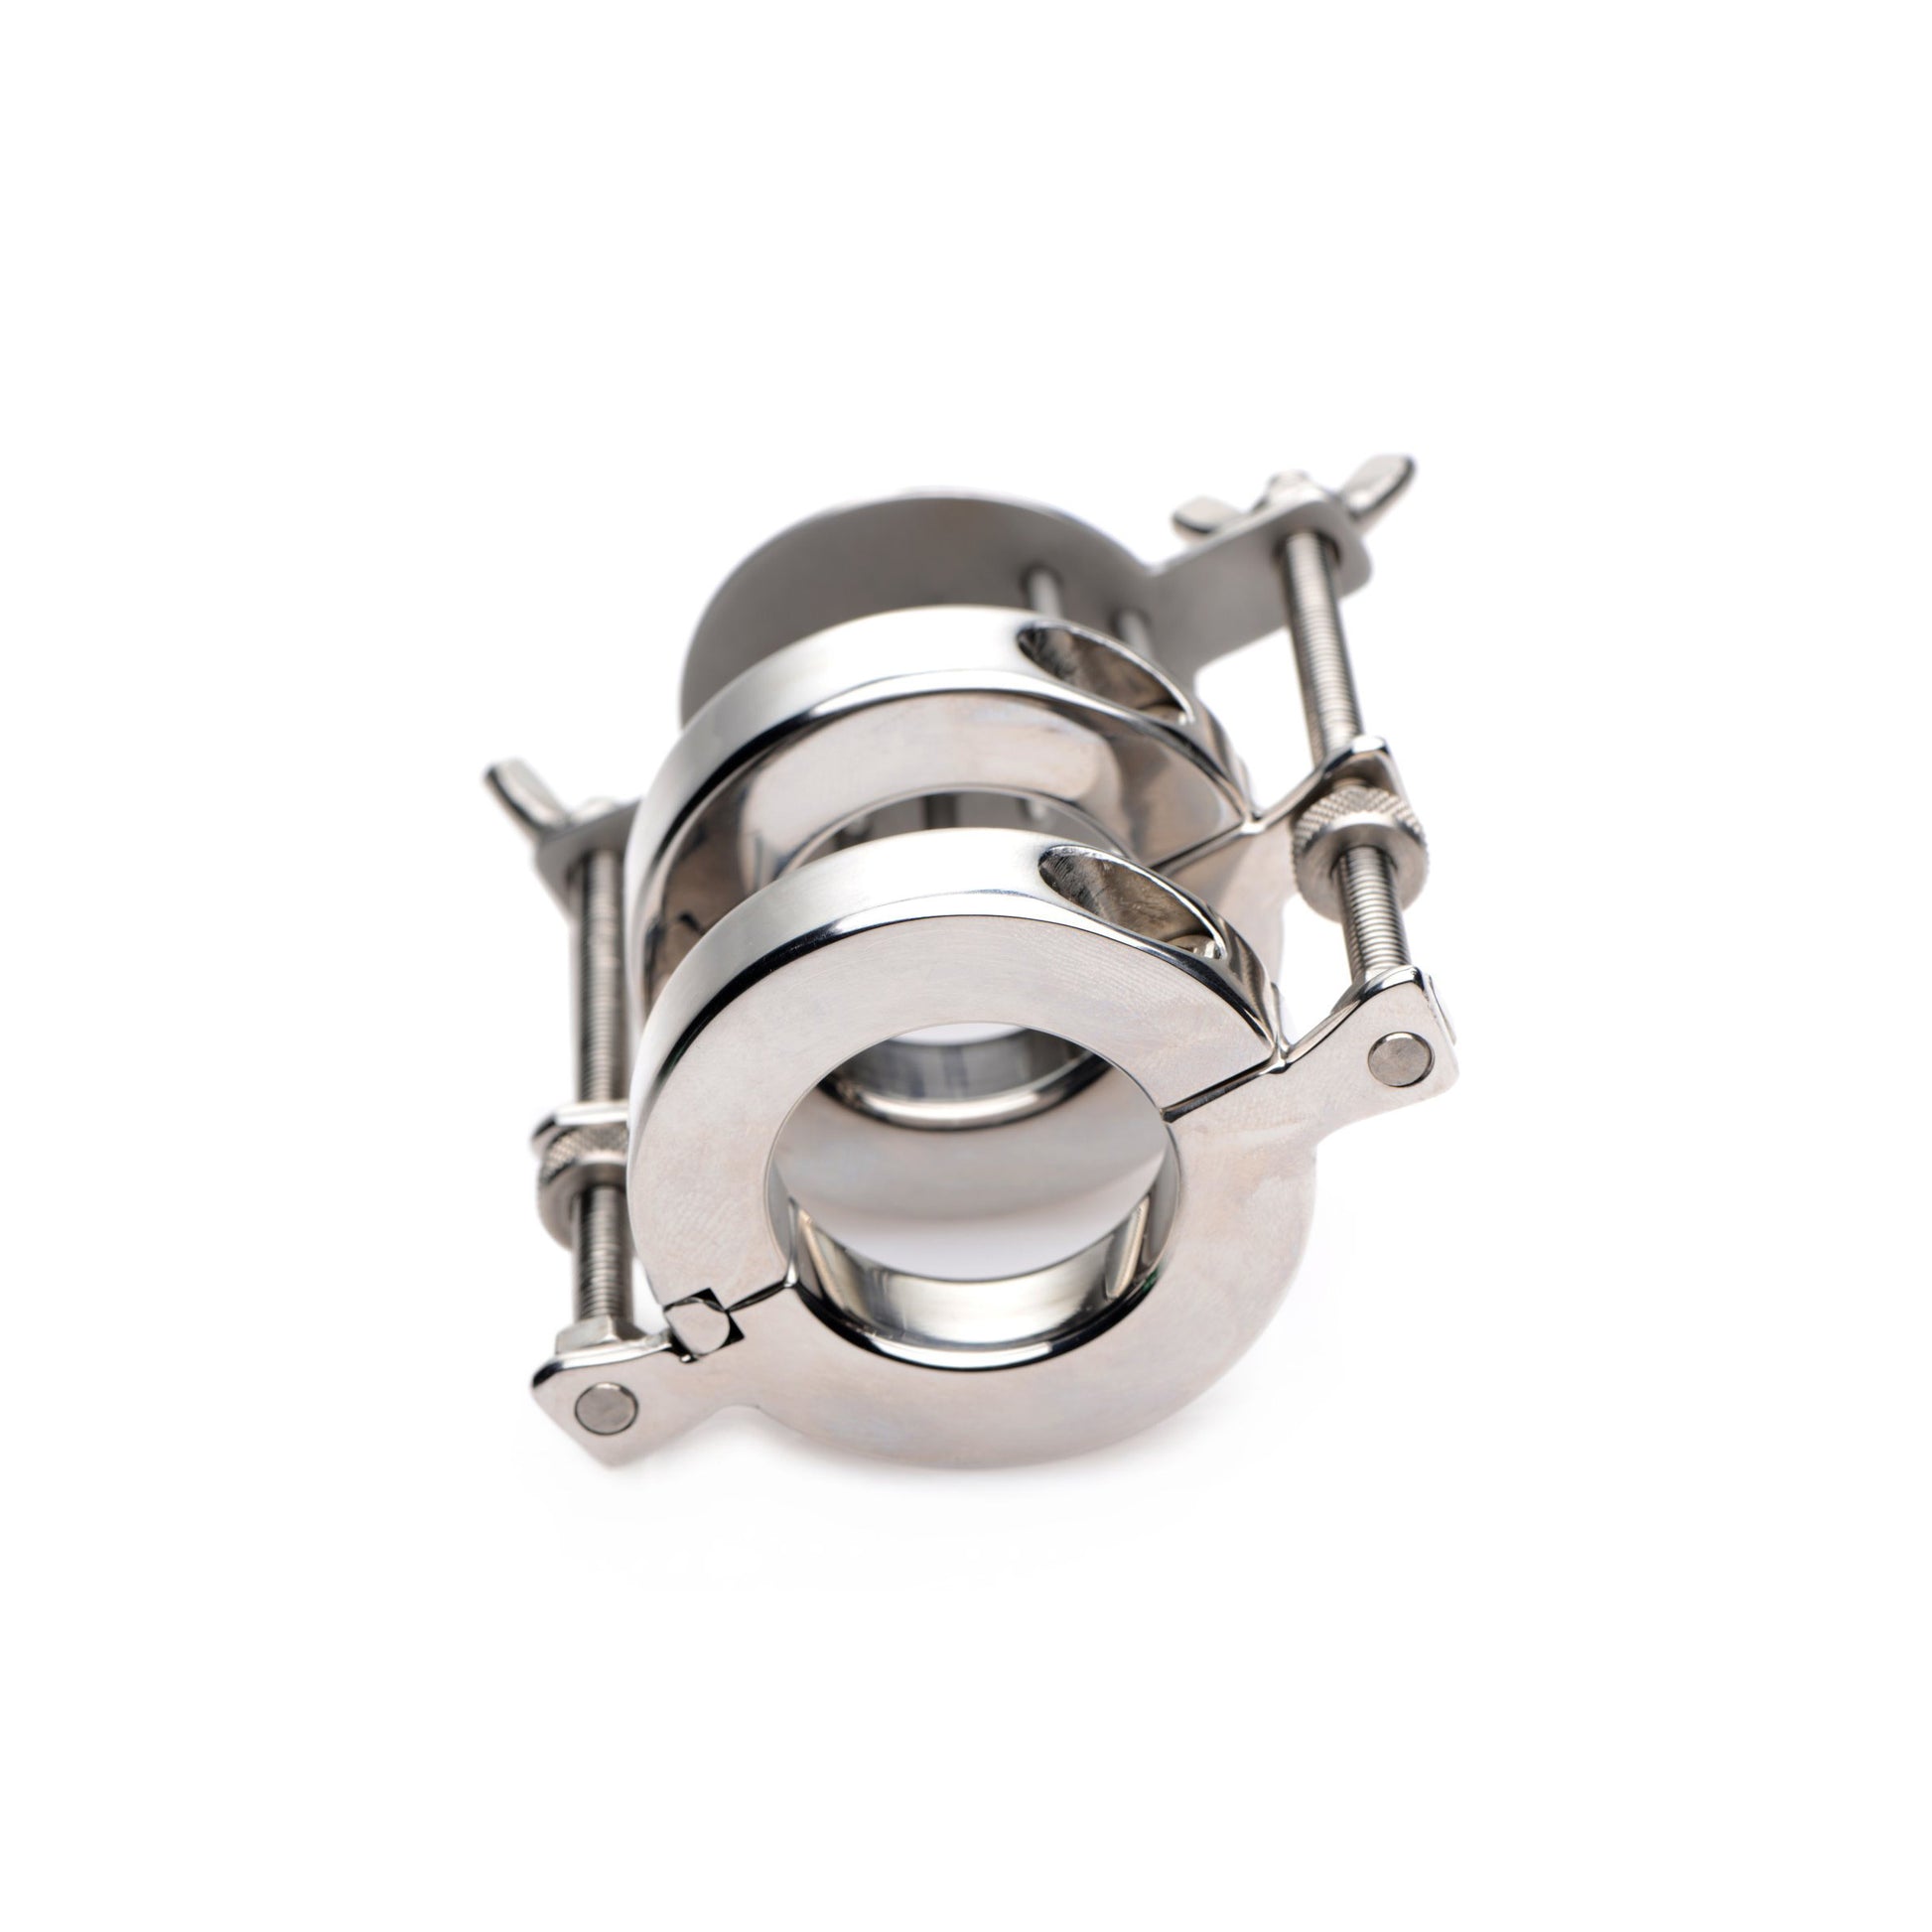 Stainless Steel Spiked CBT Ball Stretcher and Crusher - UABDSM